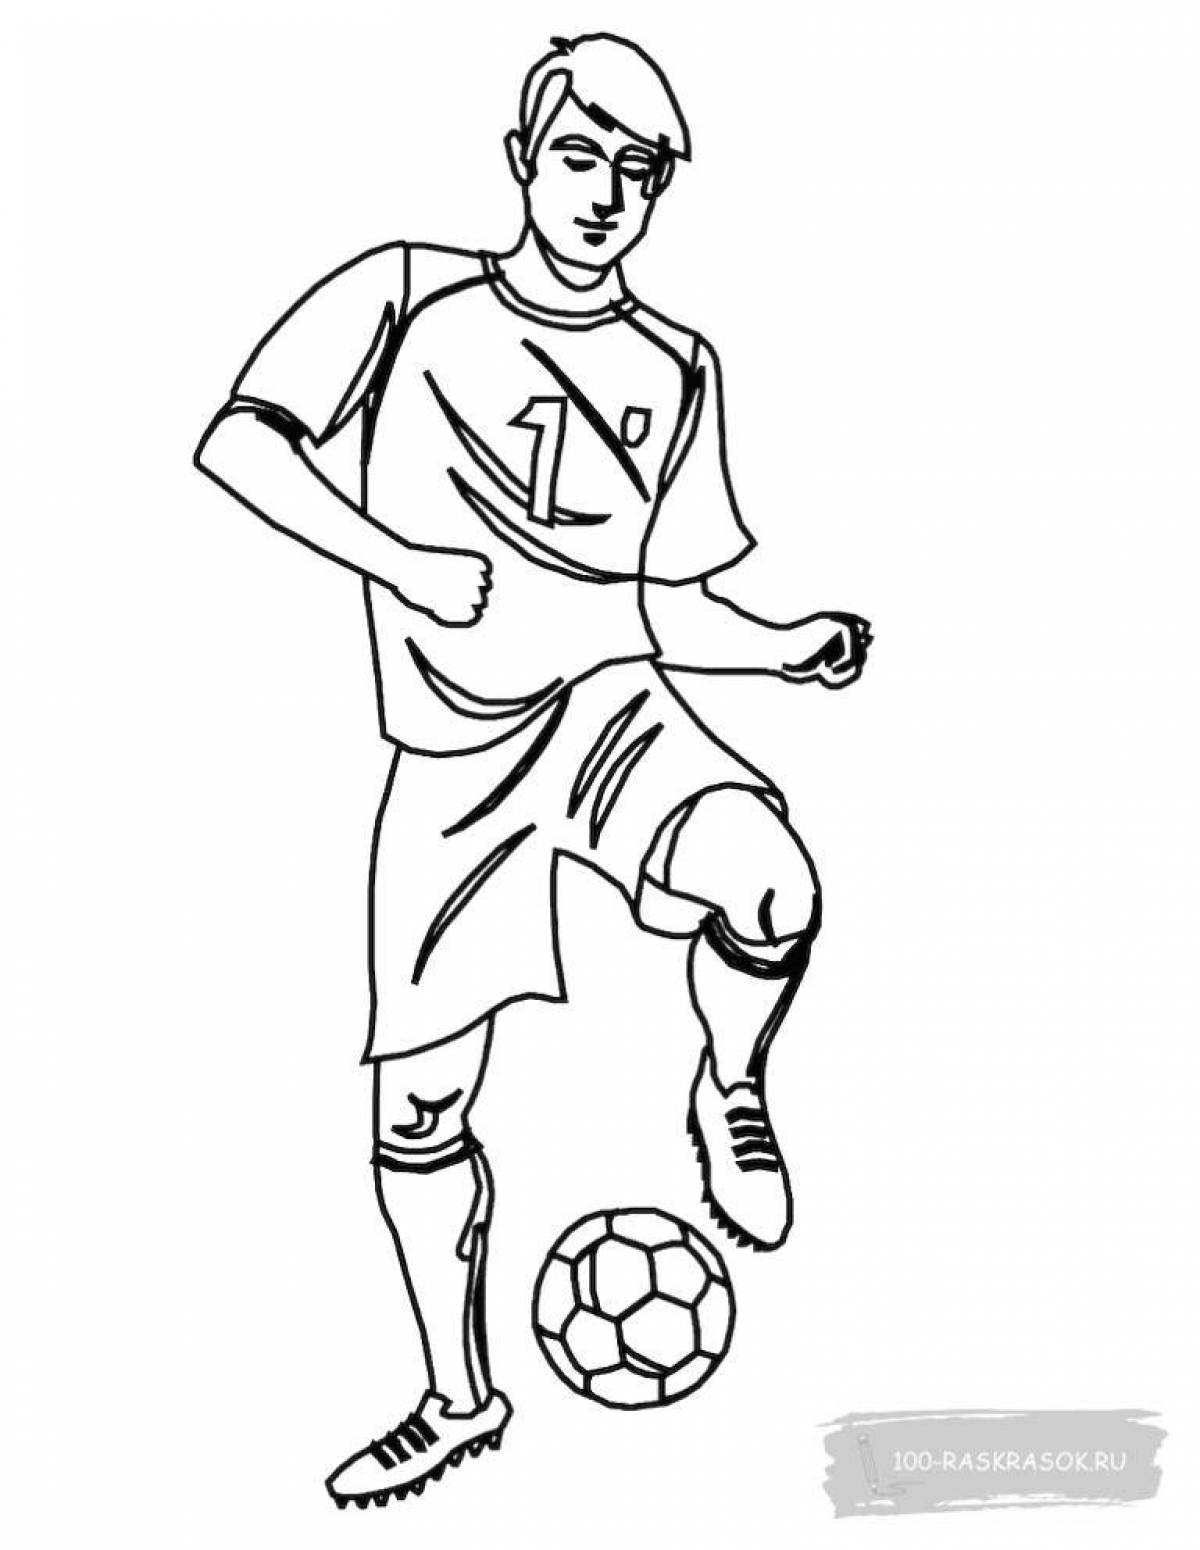 Marvelous football for boys coloring book